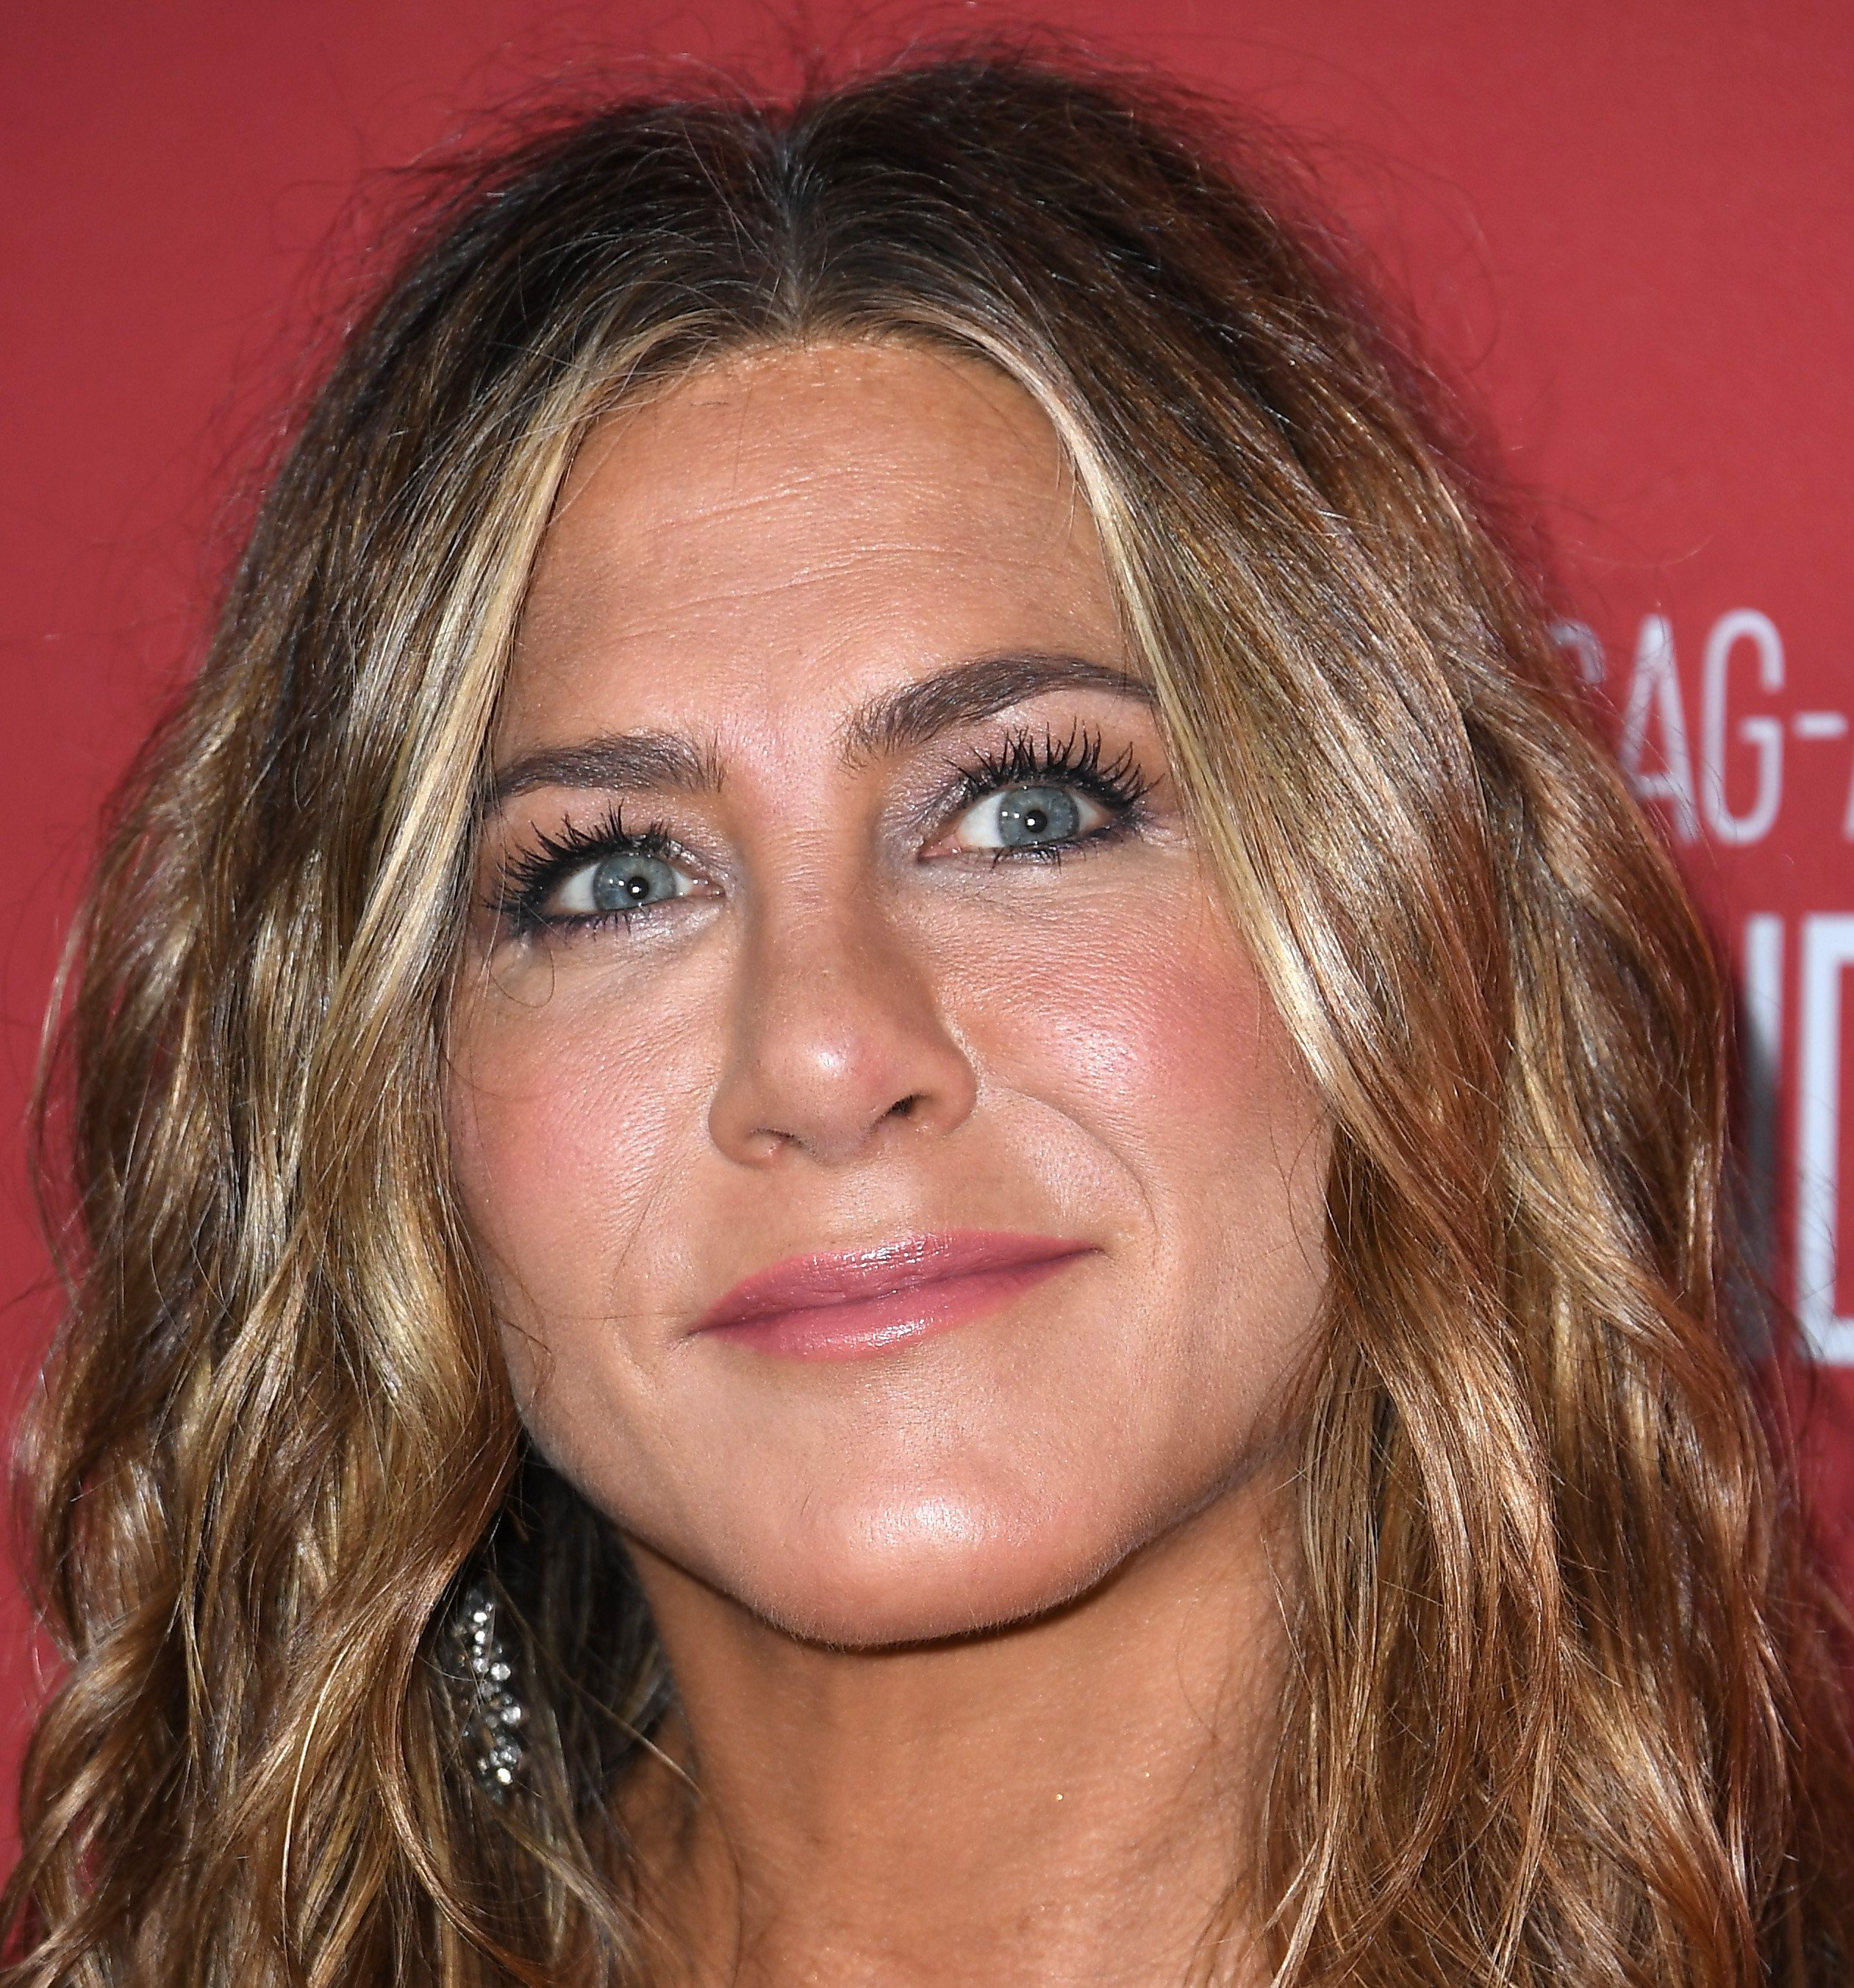 Jennifer Aniston arrives at the SAG-AFTRA Foundation's 4th Annual Patron Of The Artists Awards at Wallis Annenberg Center for the Performing Arts on November 07, 2019 in Beverly Hills, California. | Source: Getty Images